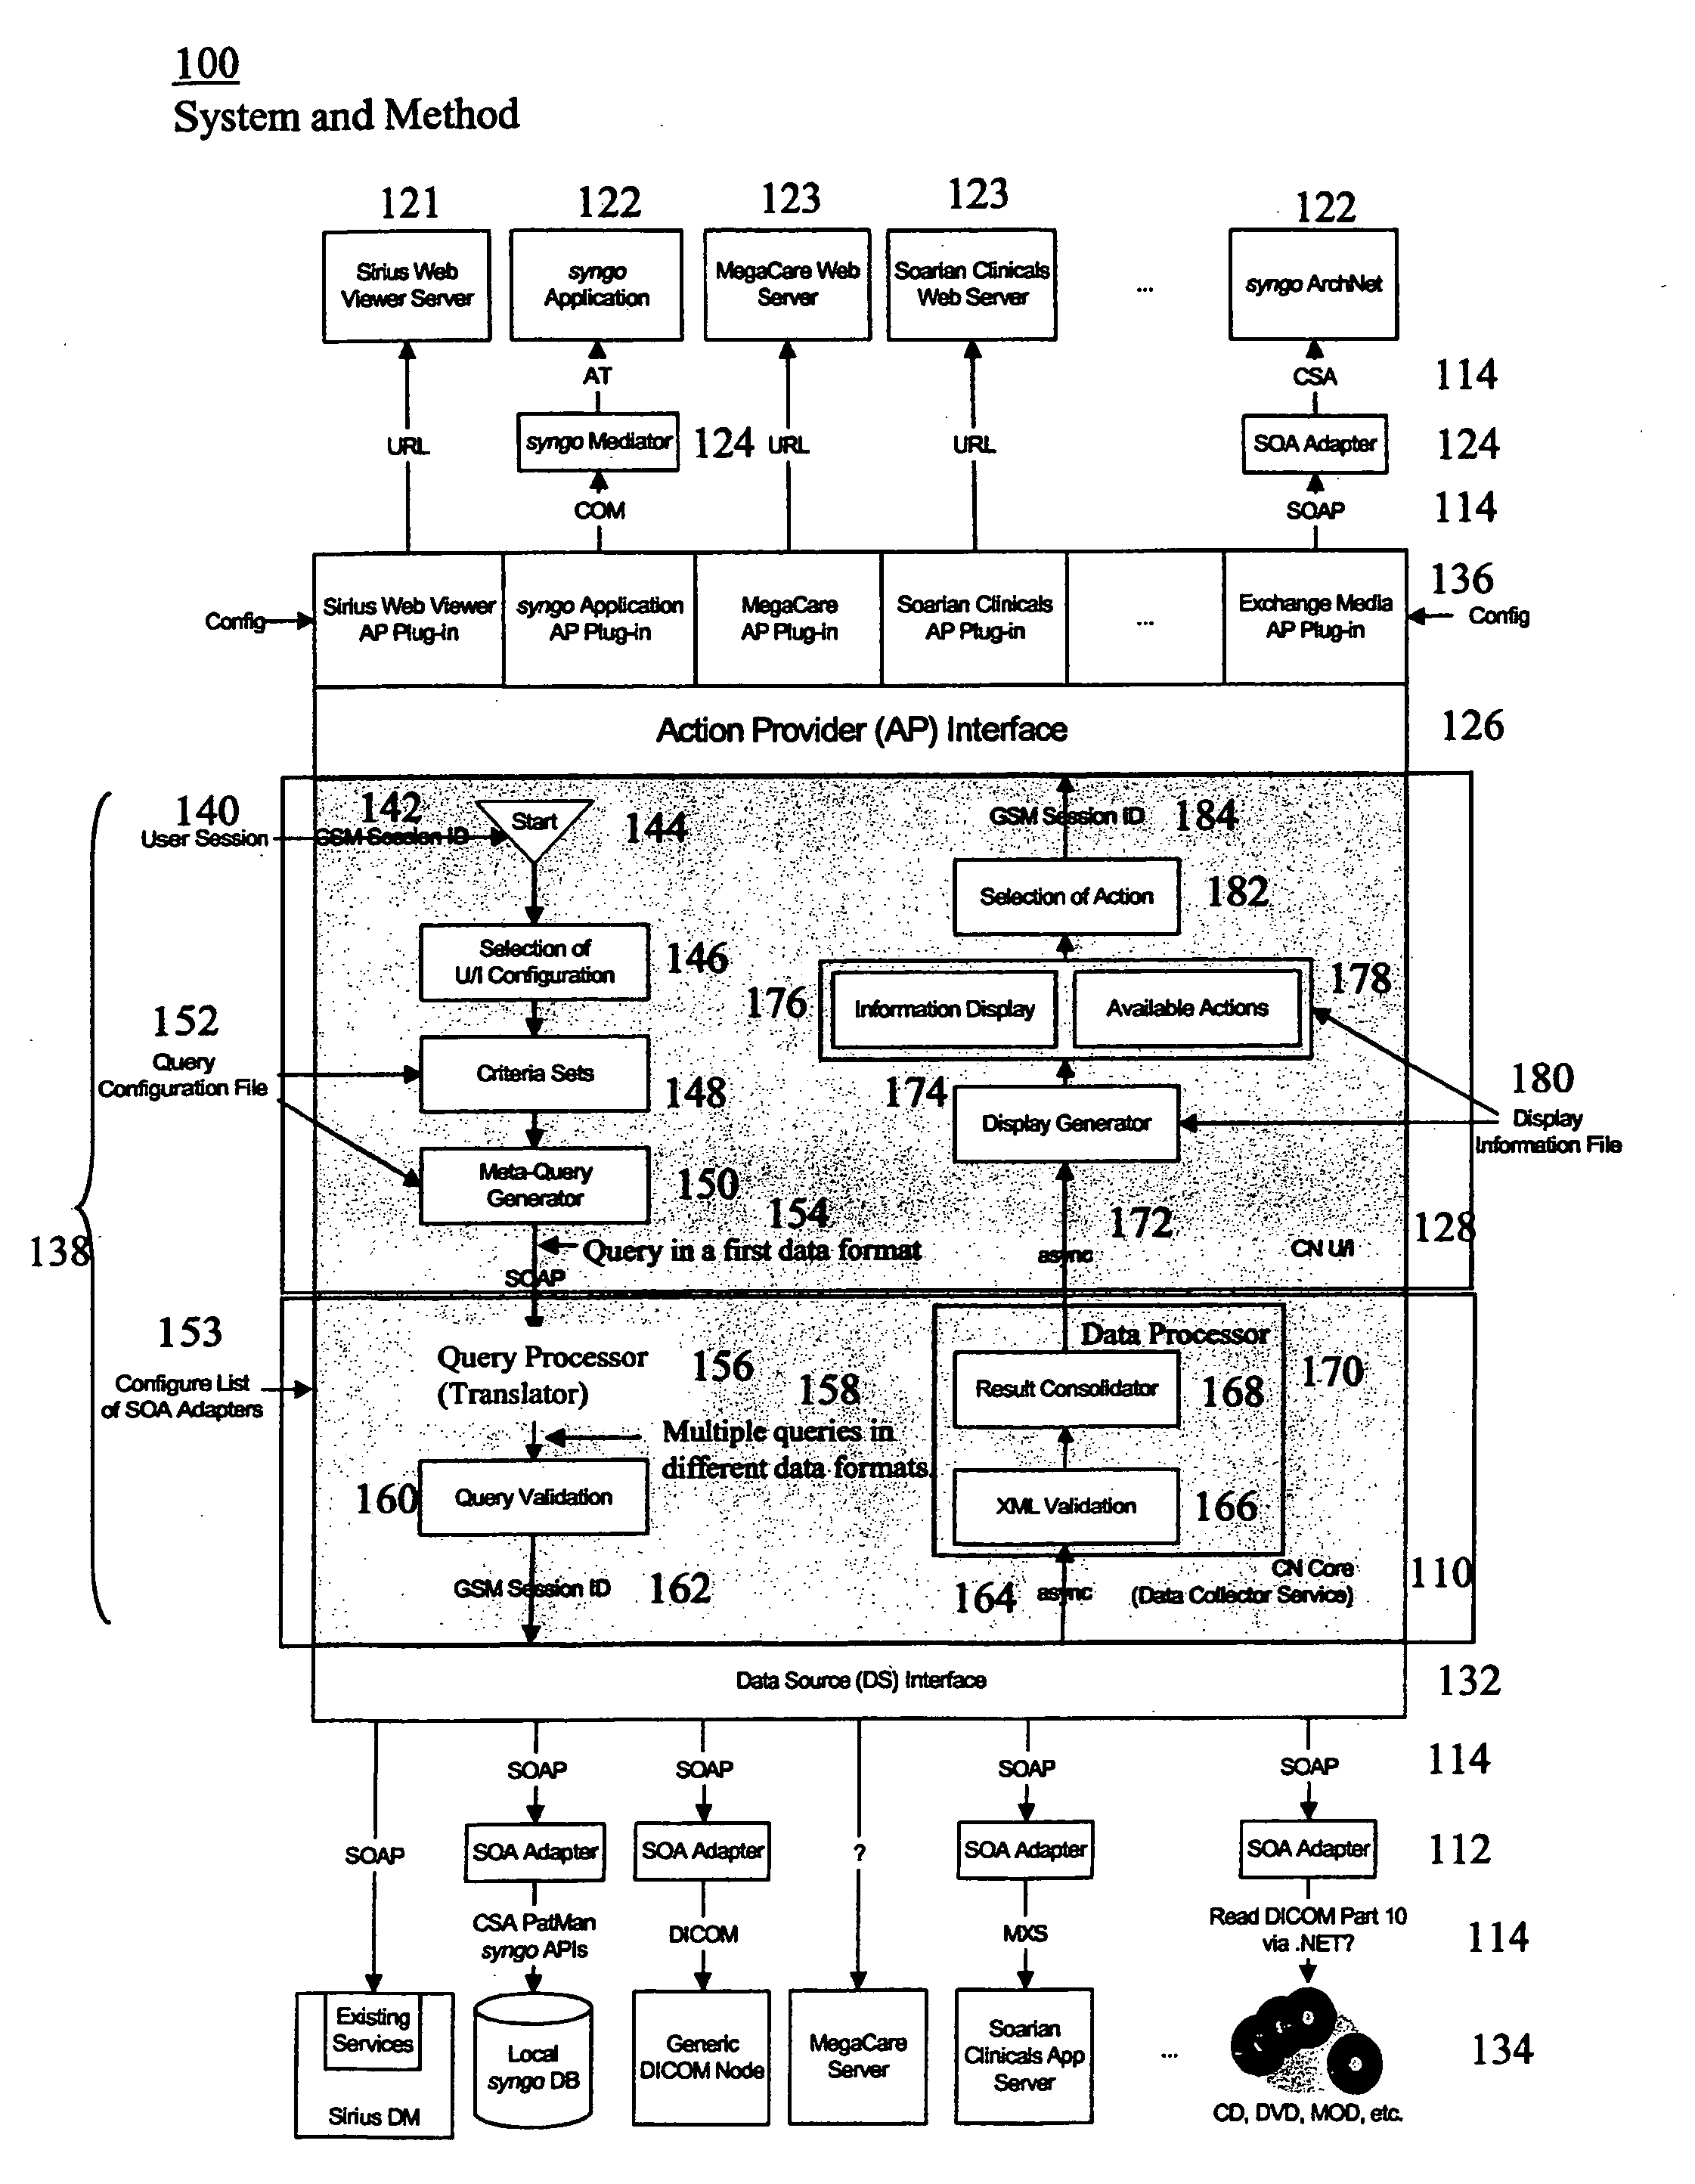 Comprehensive query processing and data access system and user interface